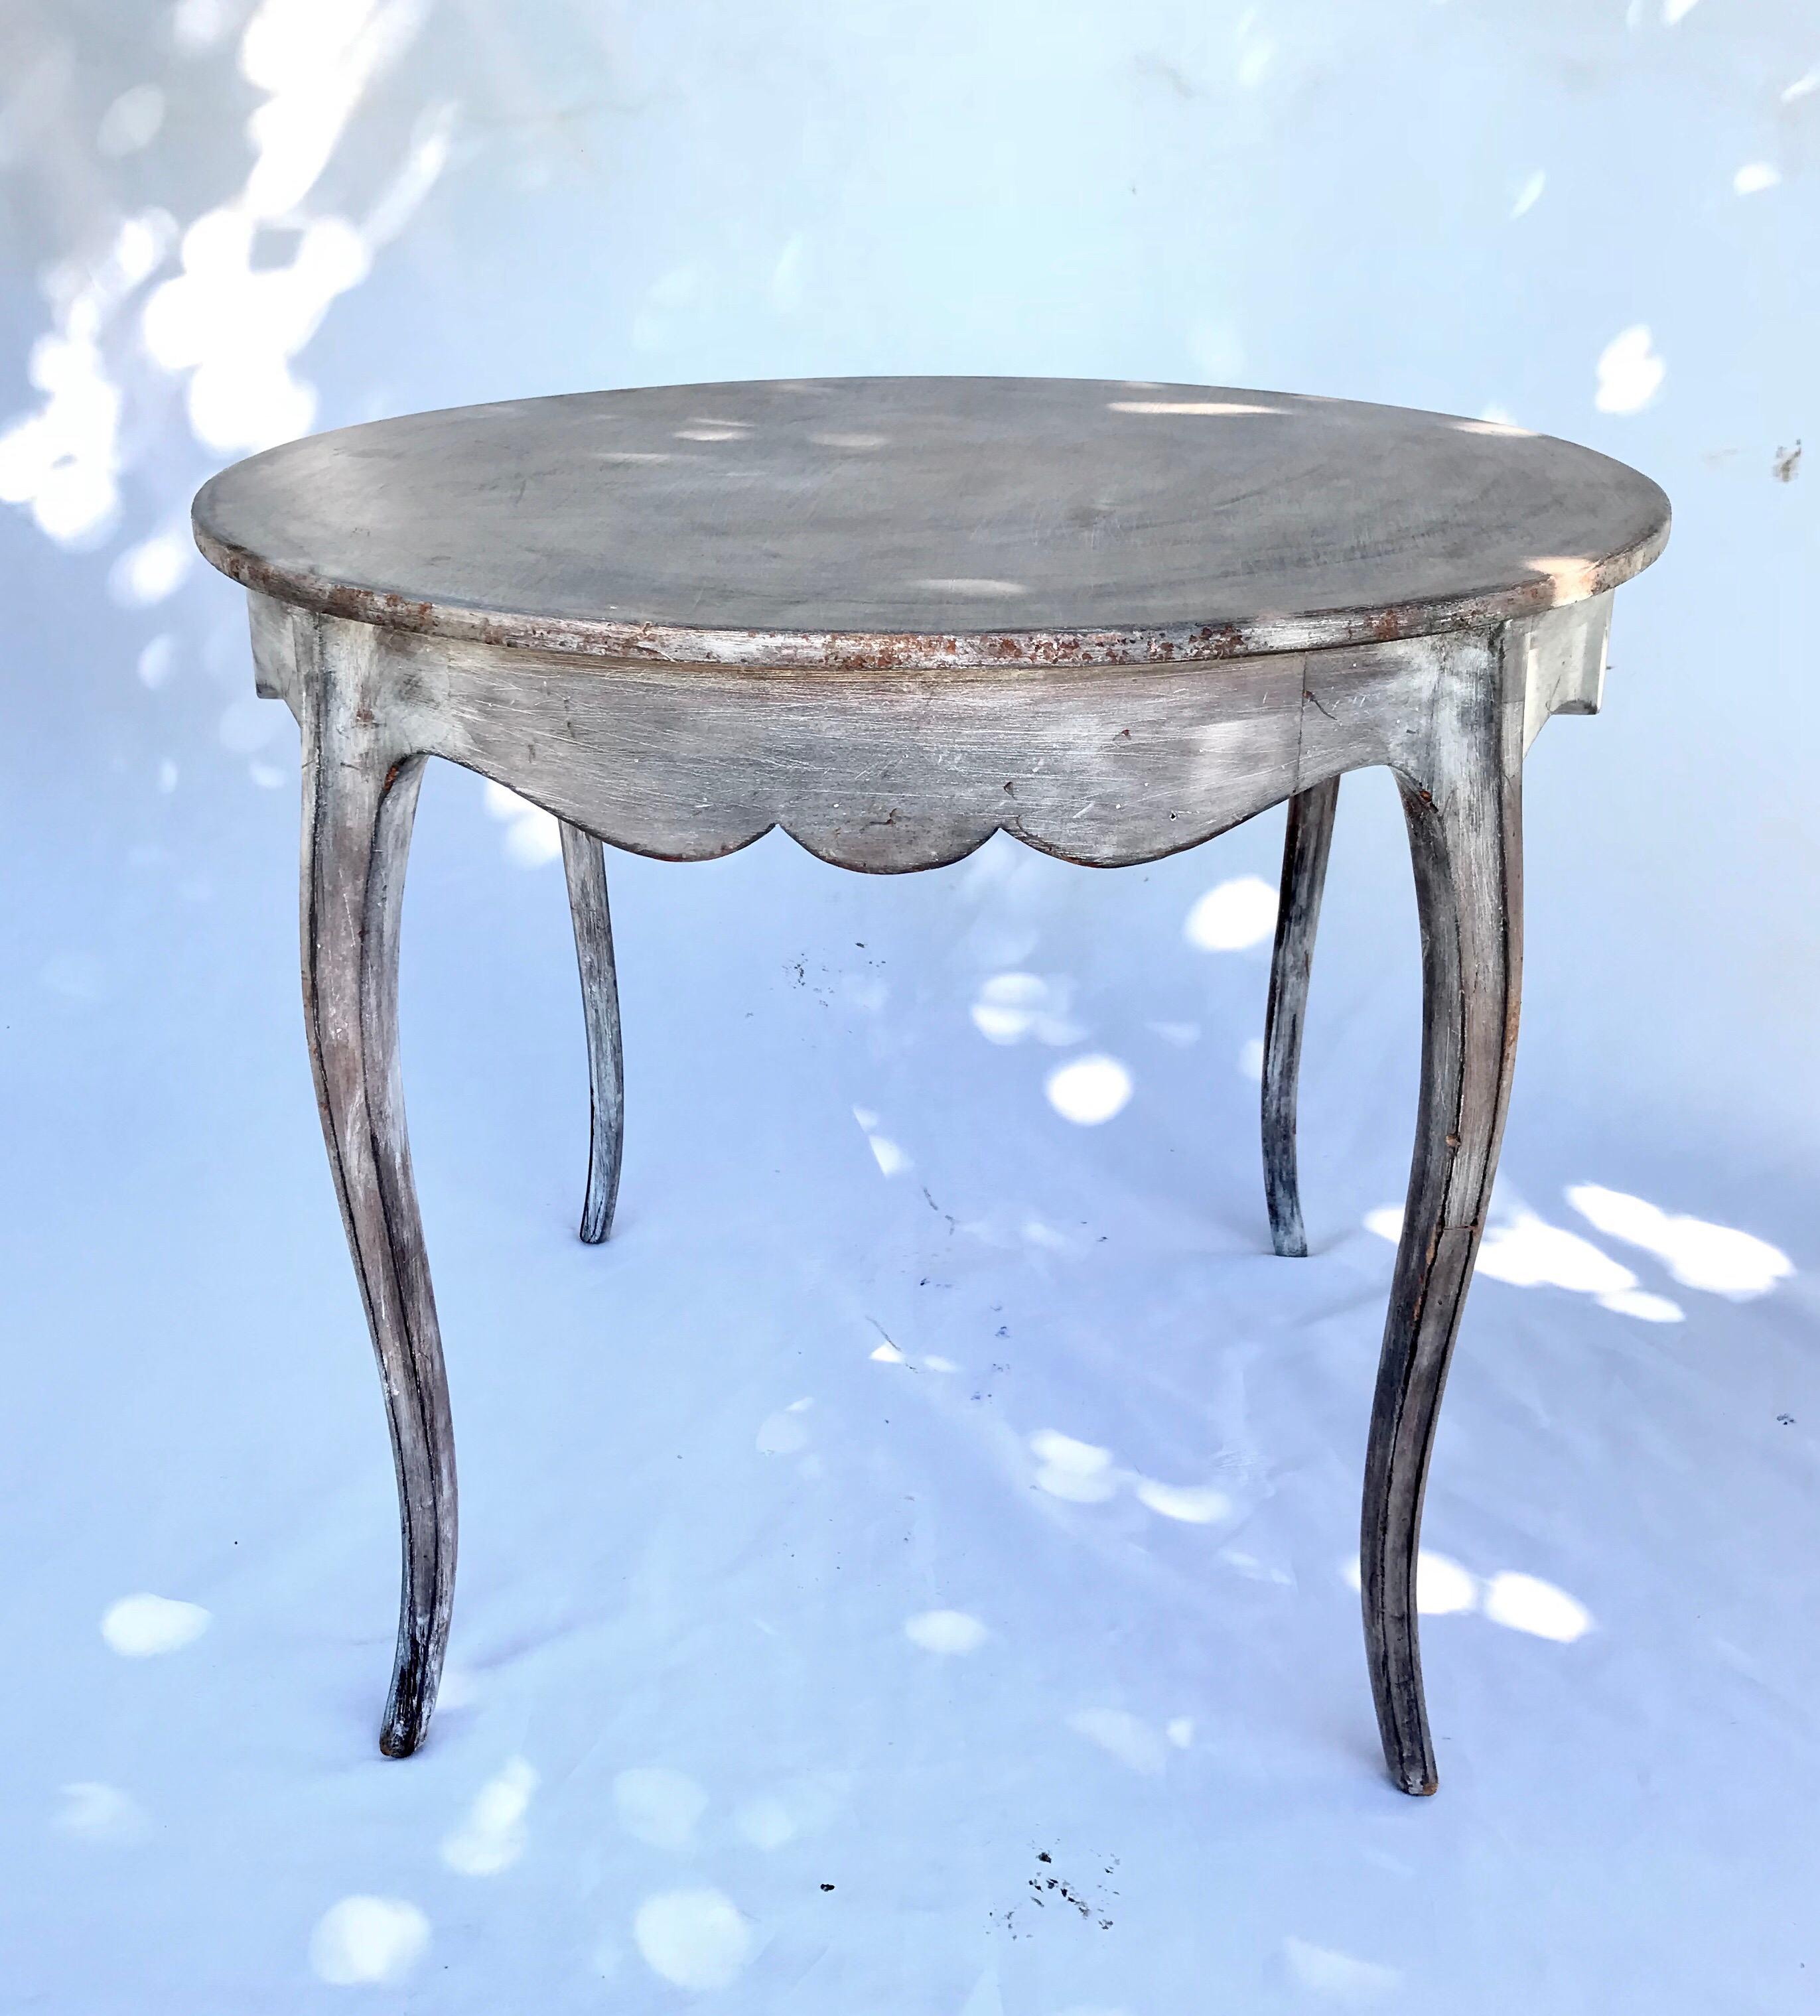 An attractive Louis XV style side table having a bleached, pickled and burnished finish in the Provincial Gustavian taste. The round topped table is supported by nicely performed cabriole legs. A Classic.